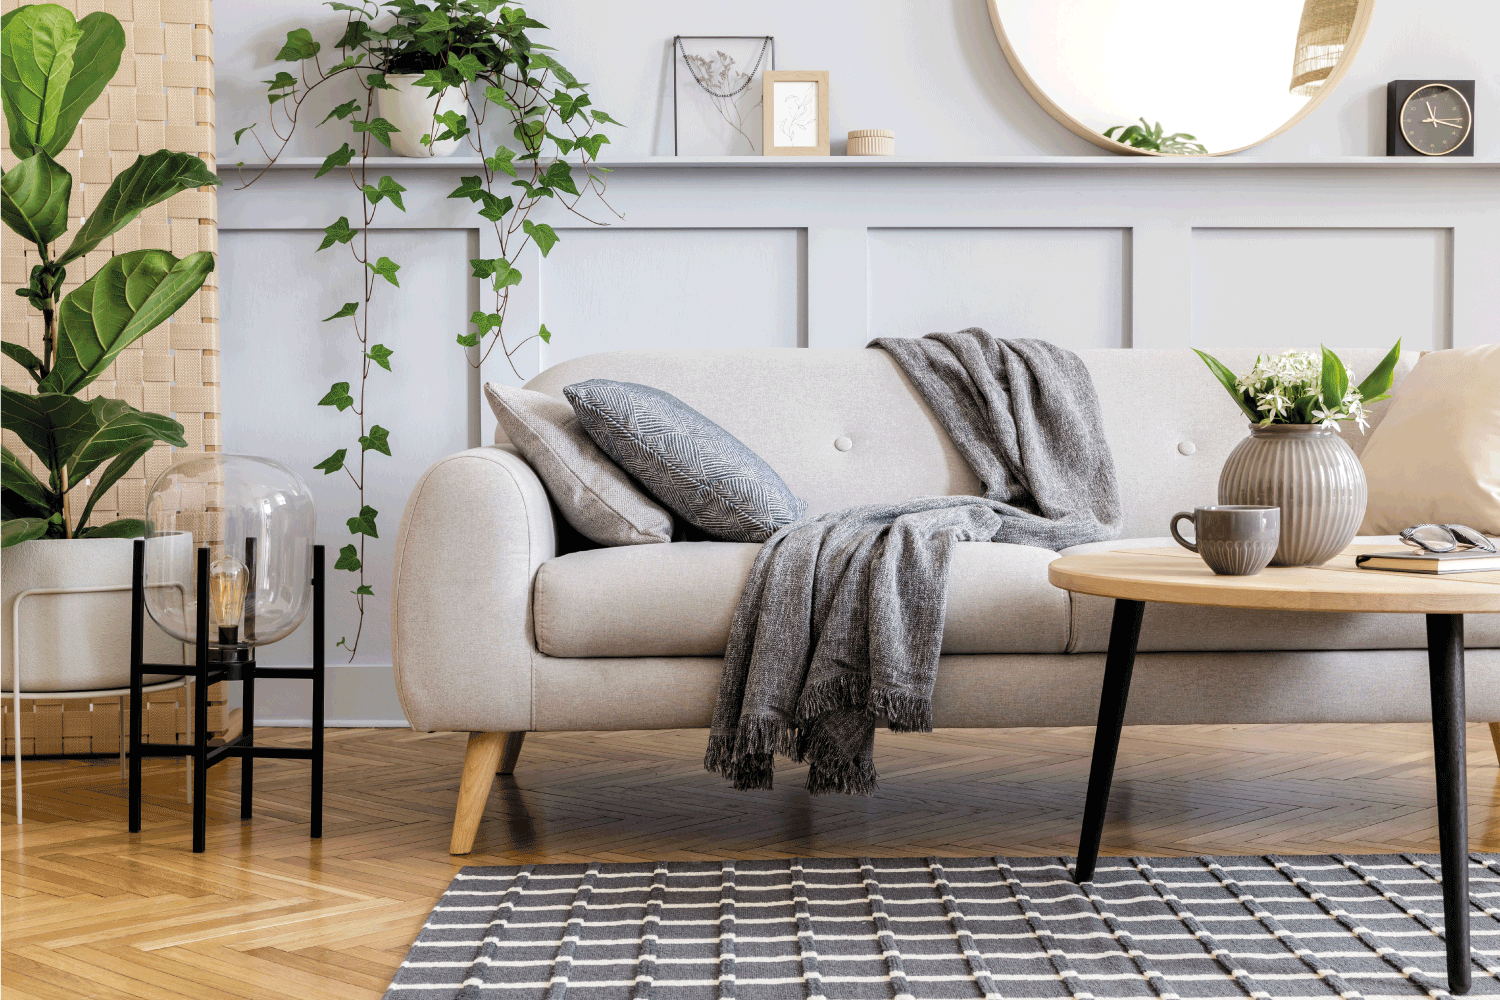 Grey And Beige Living Room scandinavian living room interior with design sofa, furniture, tropical plants and decoration. Grey wall. Neutral concept